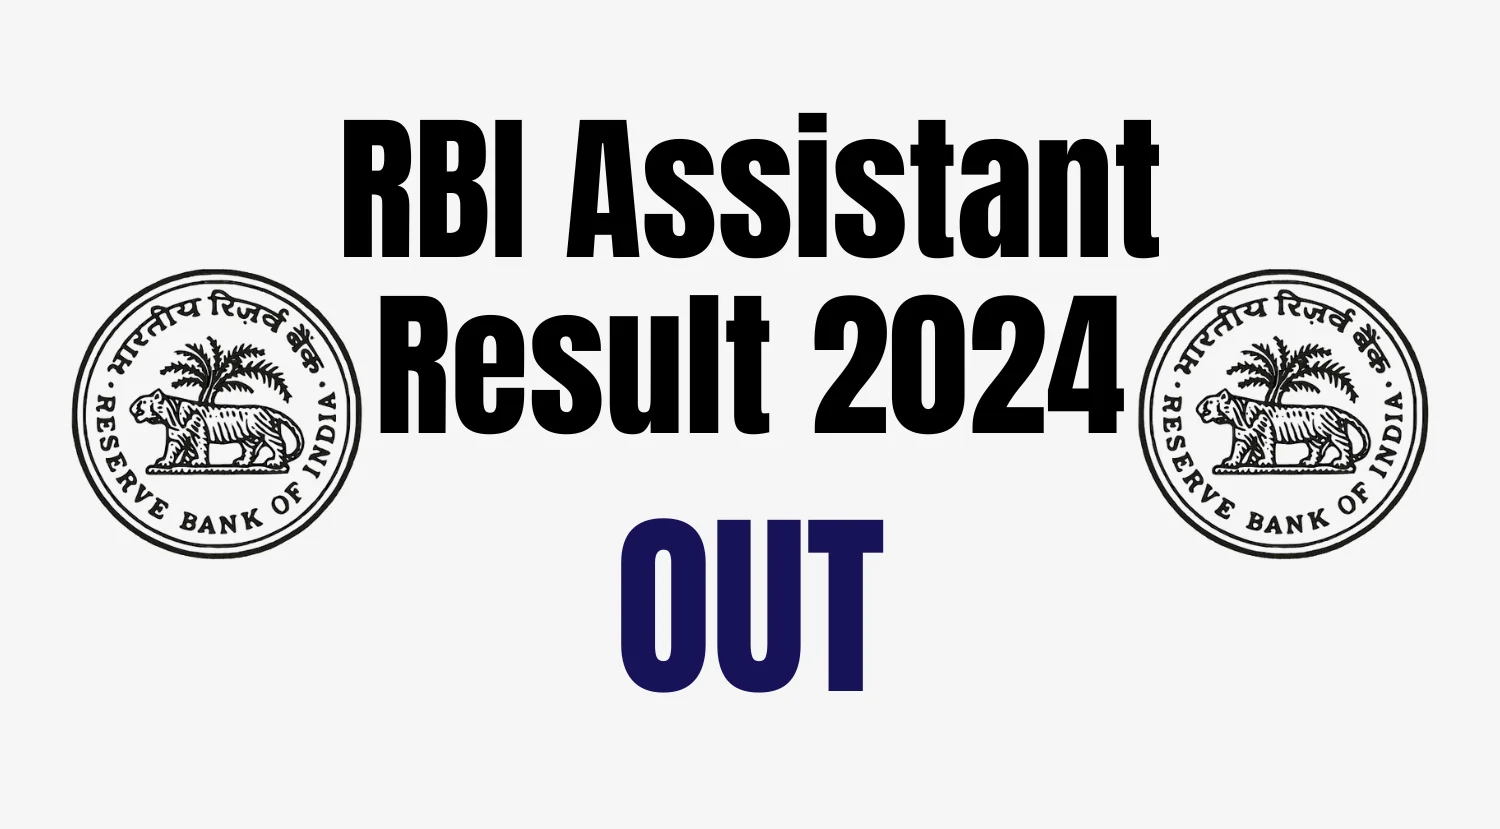 RBI Assistant Result 2024 Out for Guwahati